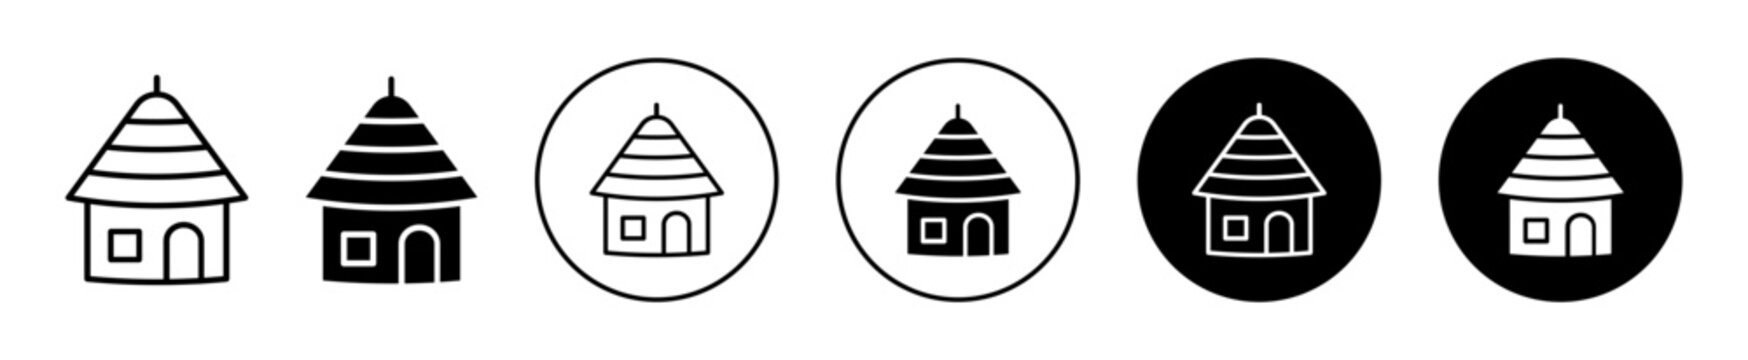 Mud hut icon. traditional rural village Kutchi bhunga home primitive shelter cottage made of grass and mud logo vector. Indian tribal straw shack mud hut or cottage shelter symbol